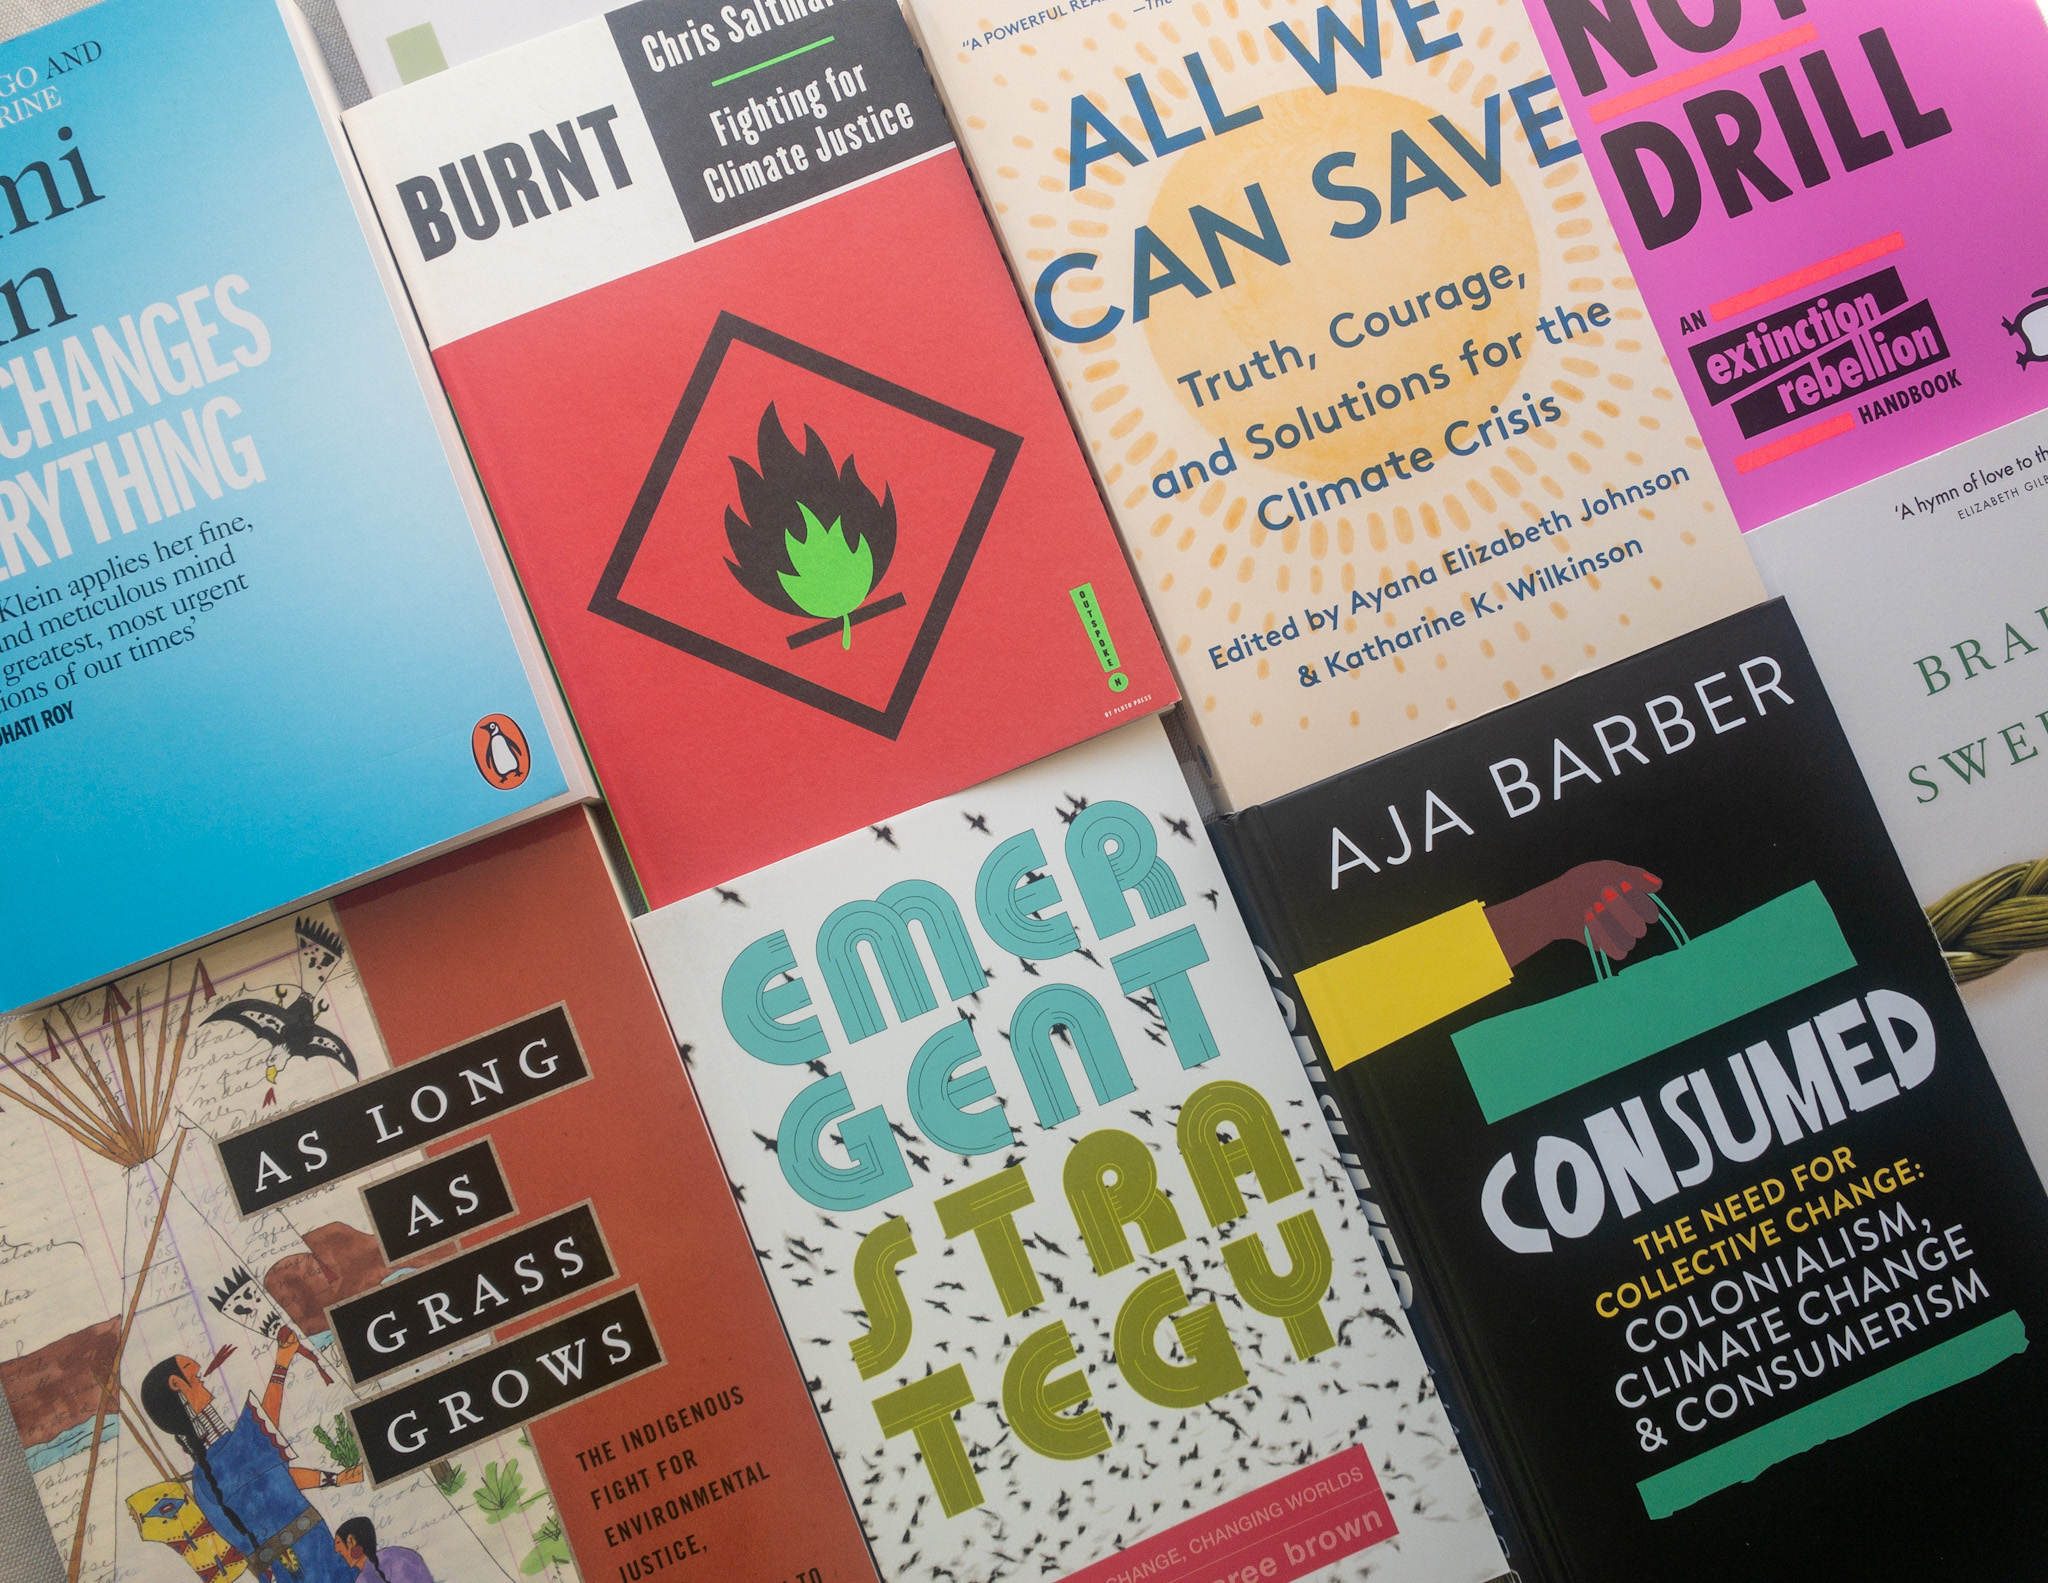 Books to Fight Climate Change and Injustice